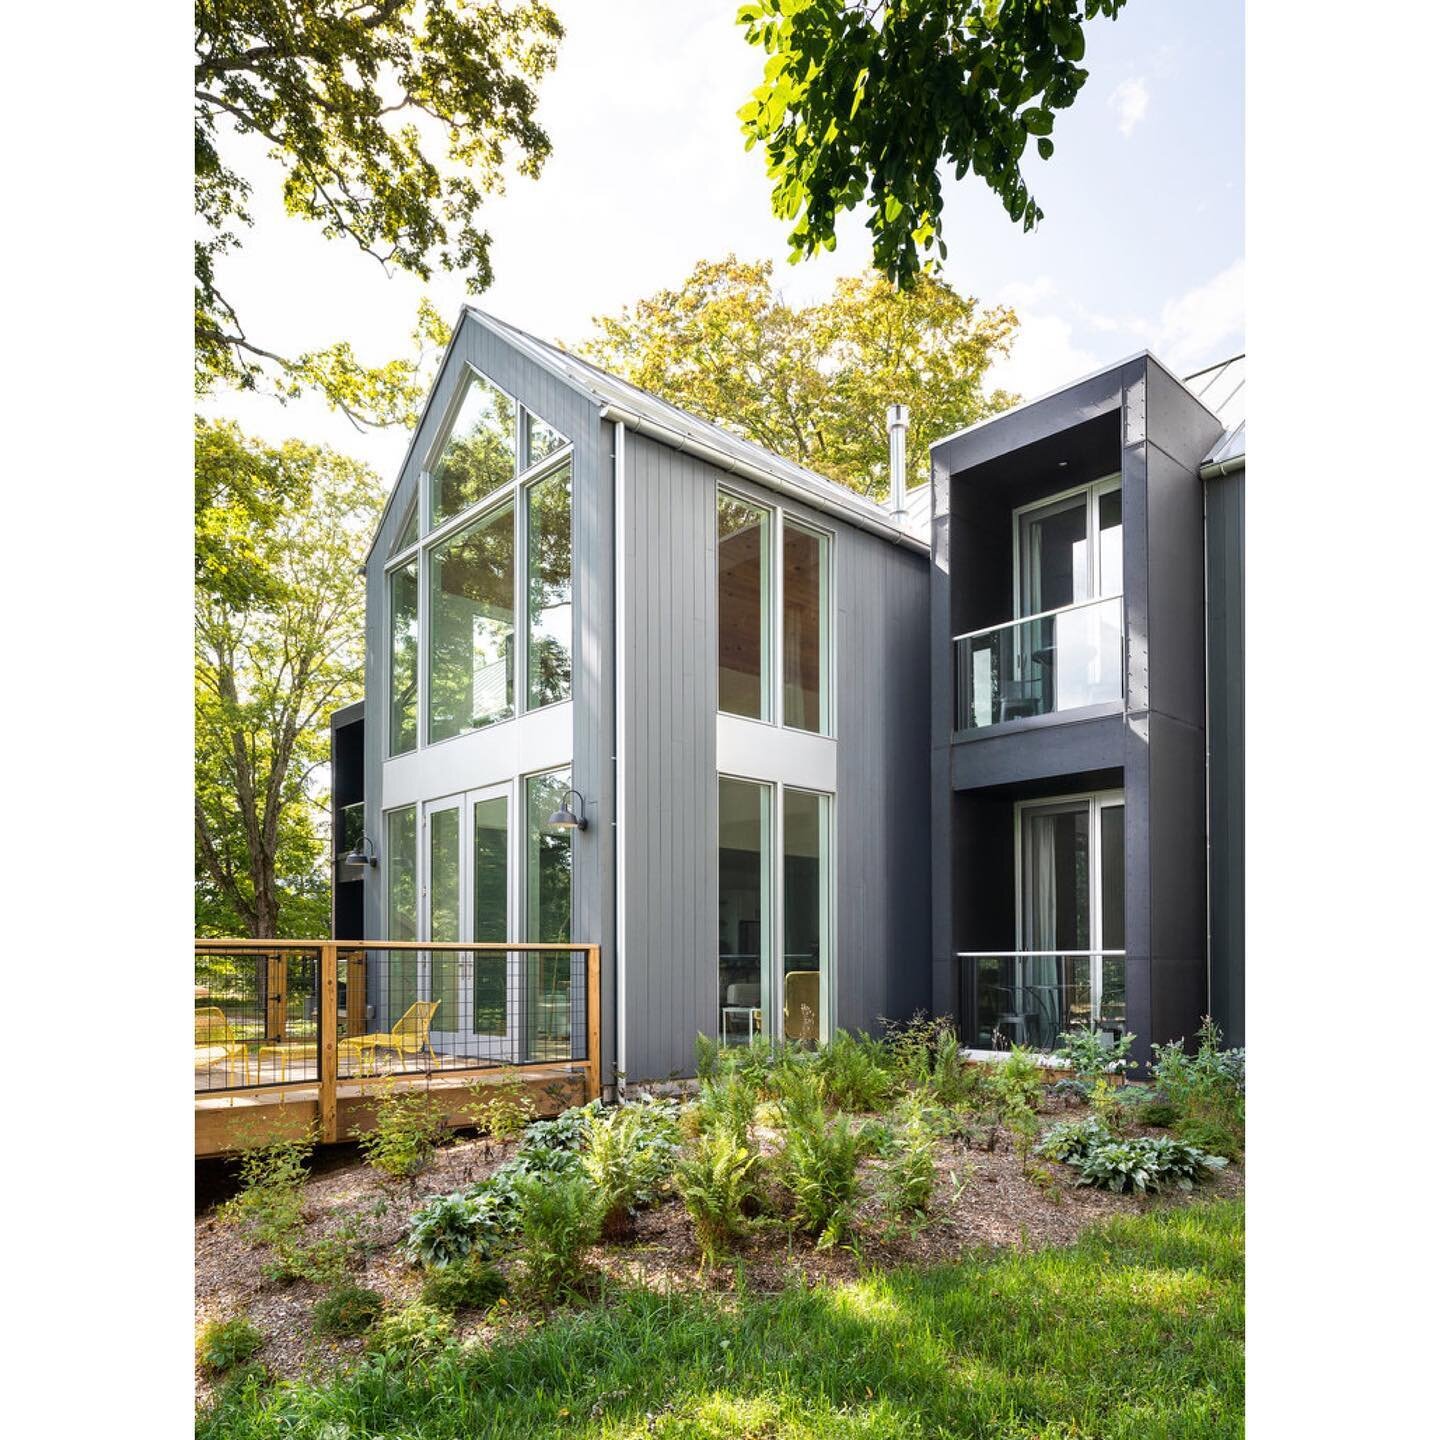 The days are getting longer, trees and plants are budding, which has me thinking about the Catskills, so here is a flashback to @thegraybarn designed by @studiommarchitect and built by @baxter_built